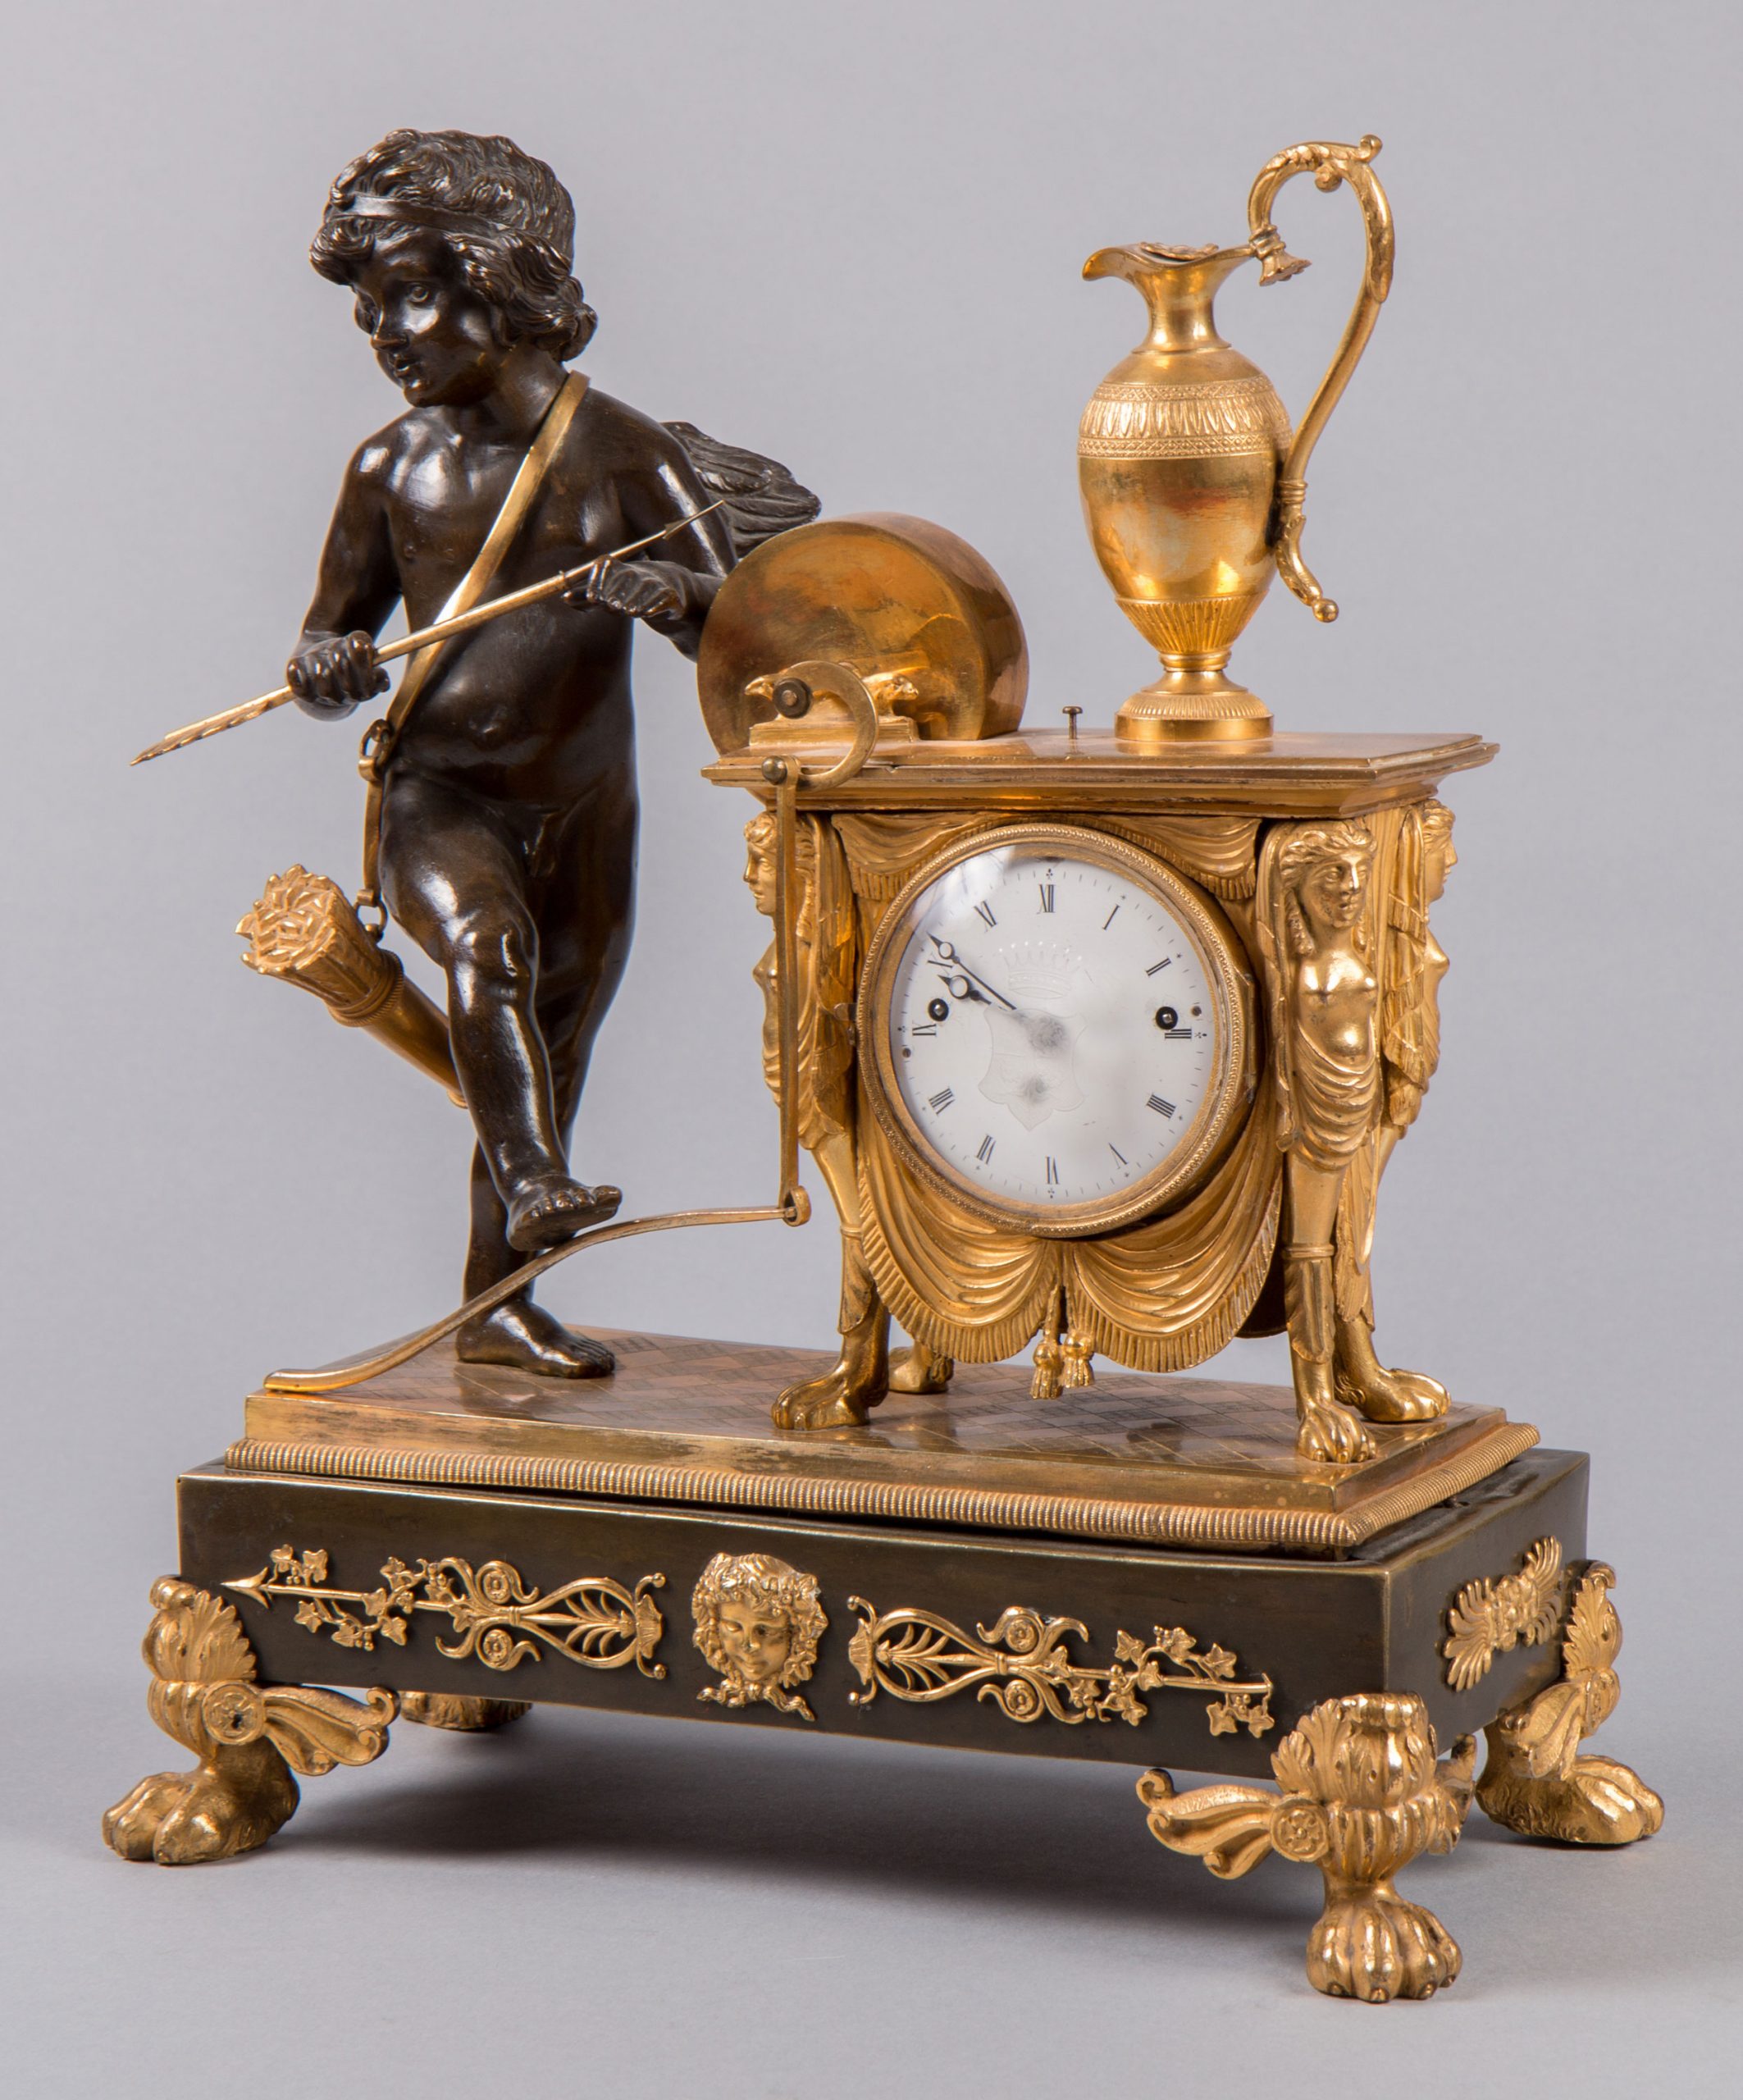 Figural empire mantel clock “Amor” Andréewitch - Stephan